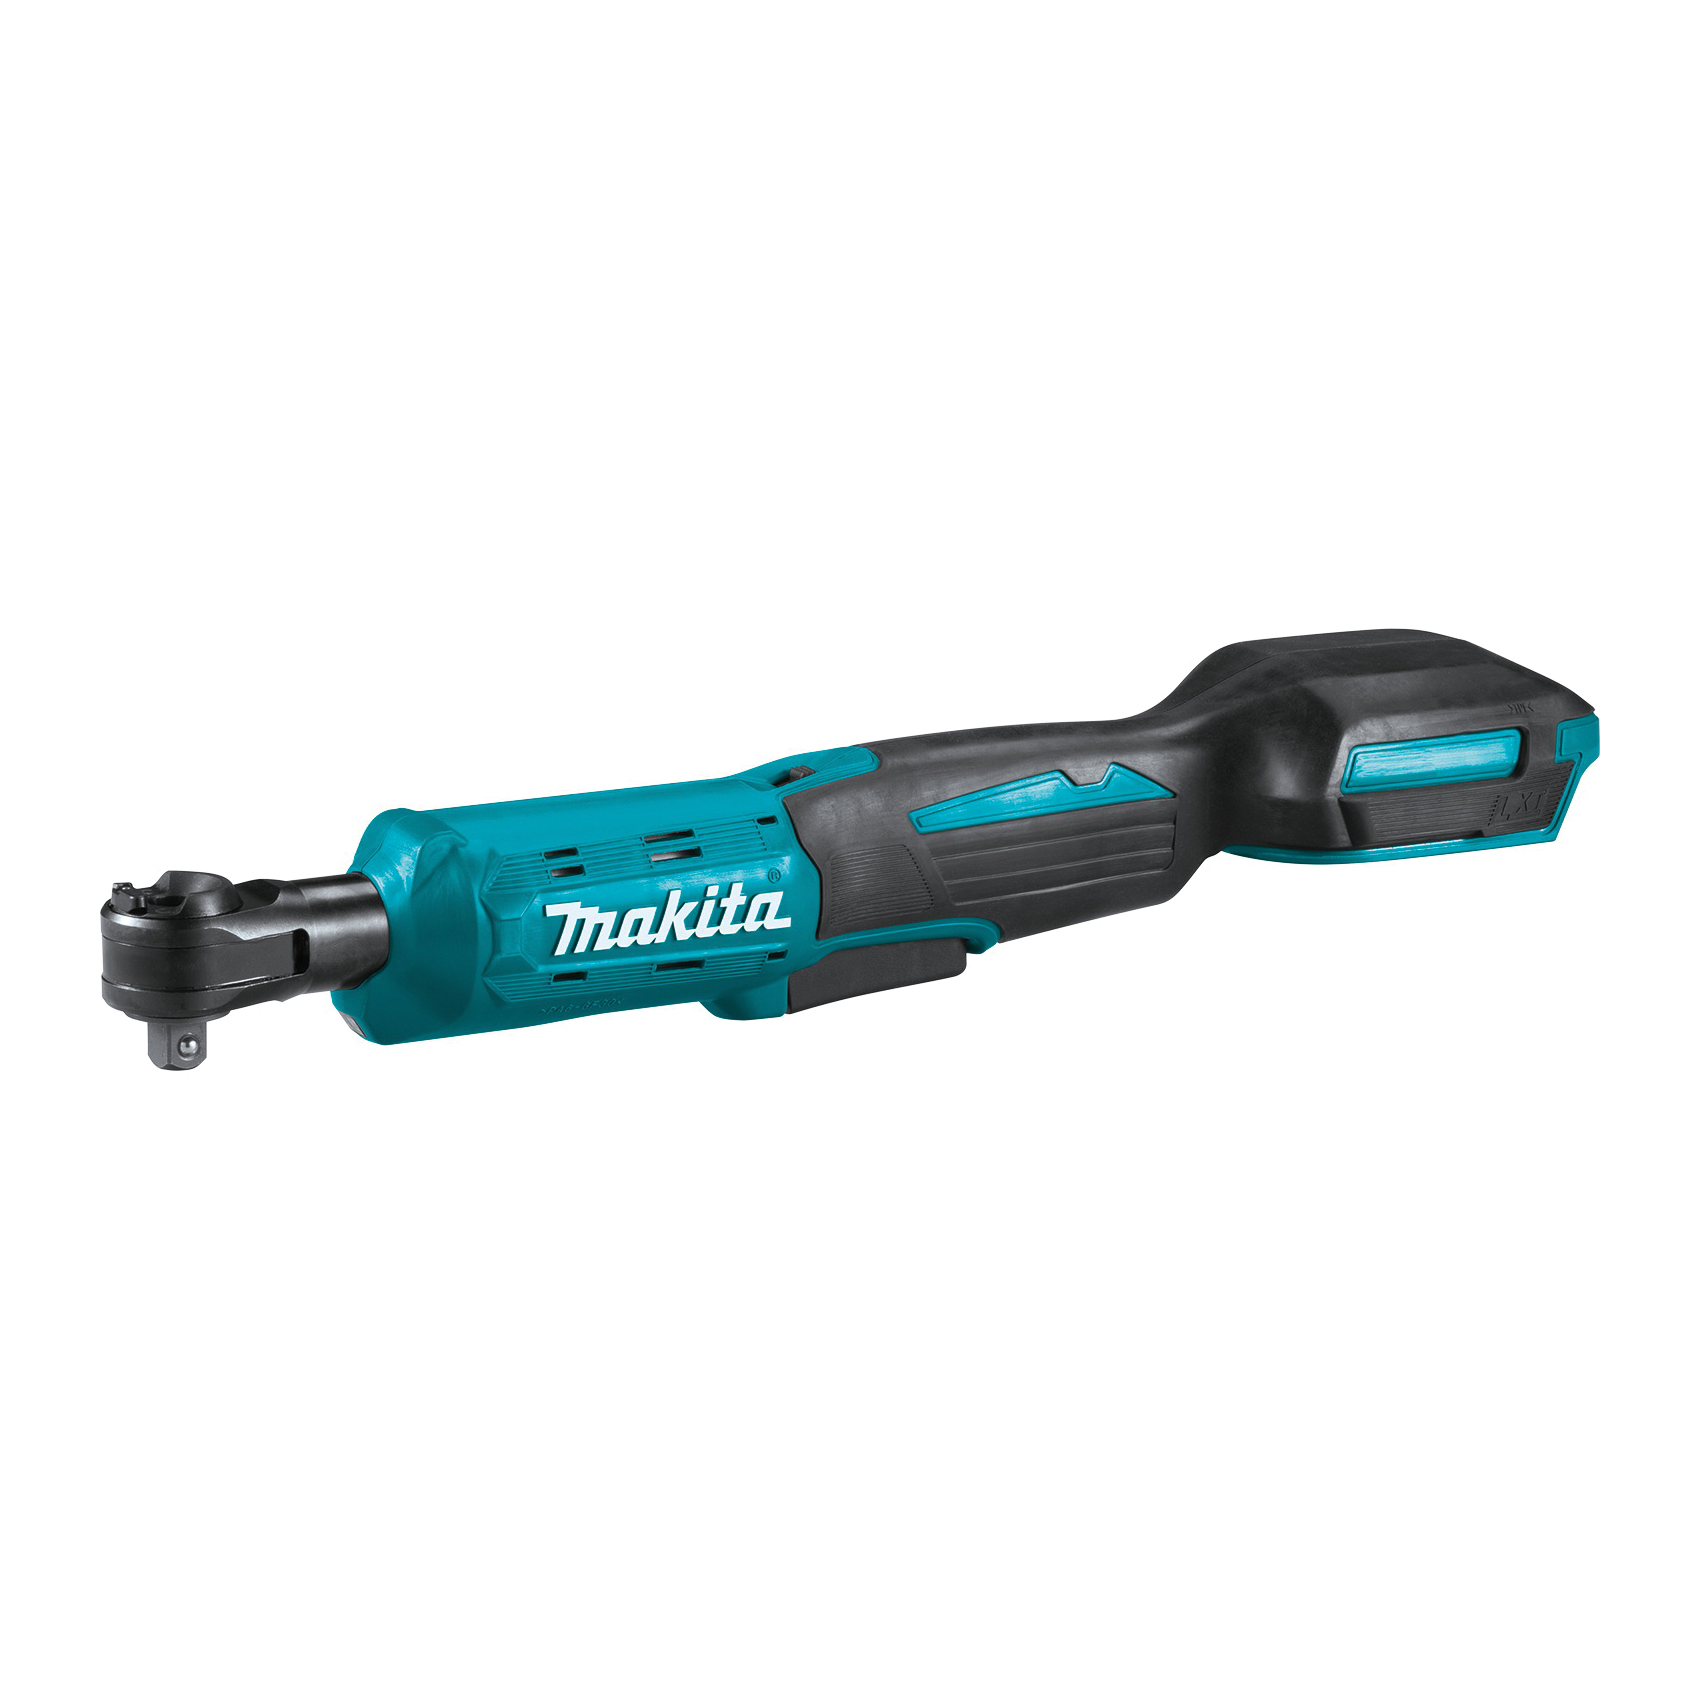 LXT XRW01Z Ratchet, Tool Only, 18 V, 3/8, 1/4 in Drive, Square Drive, 0 to 800 rpm Speed